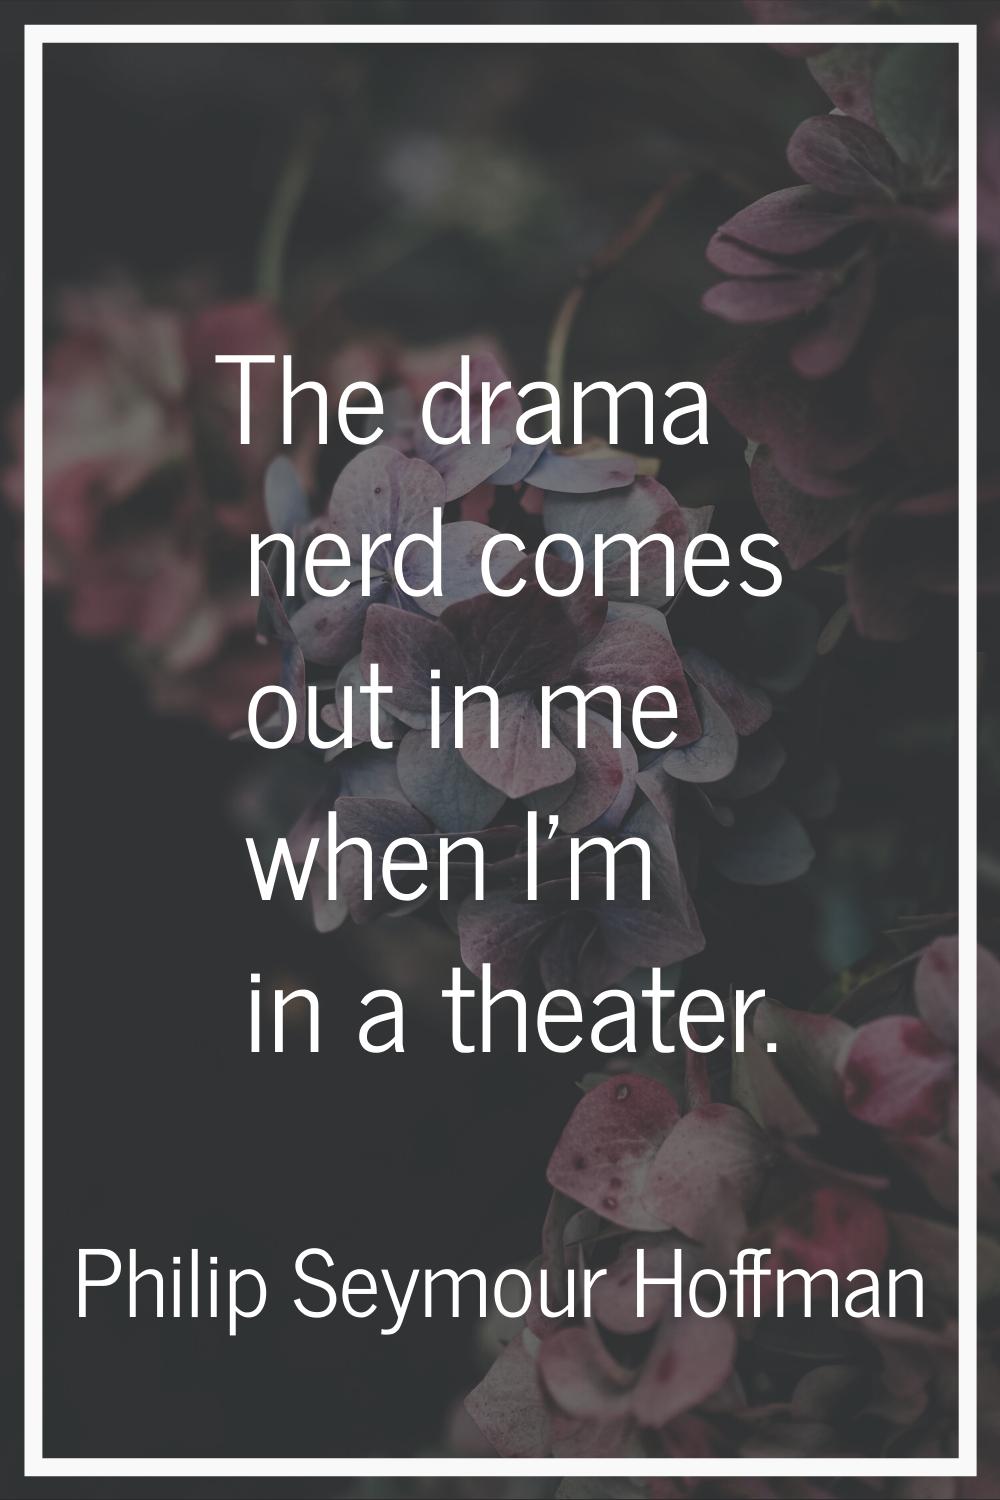 The drama nerd comes out in me when I'm in a theater.